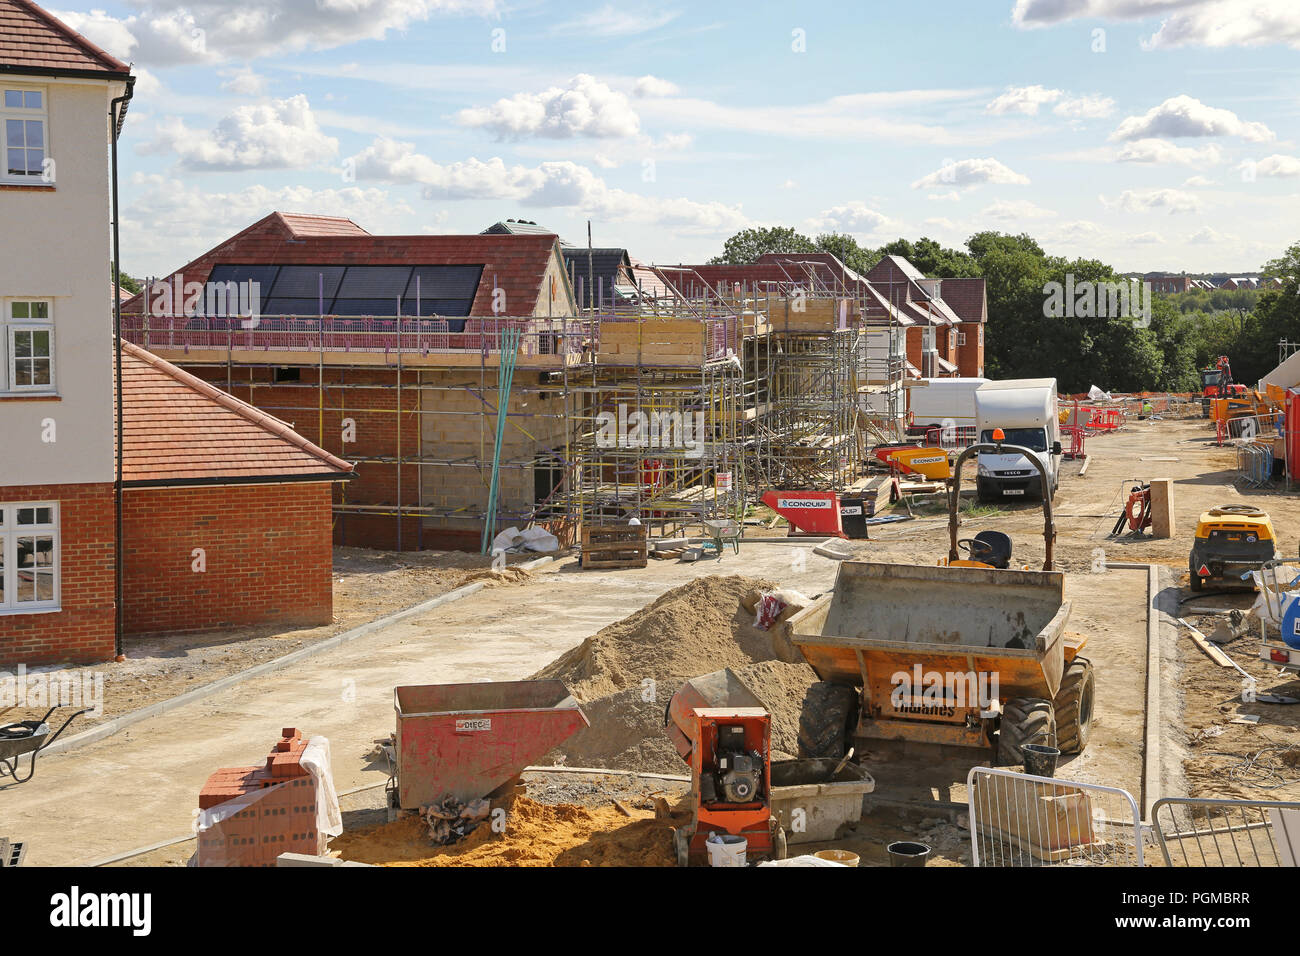 New homes under construction in the Castle Hill district of Ebbsfleet Garden City, south east of London, UK. A major new government housing initiative Stock Photo